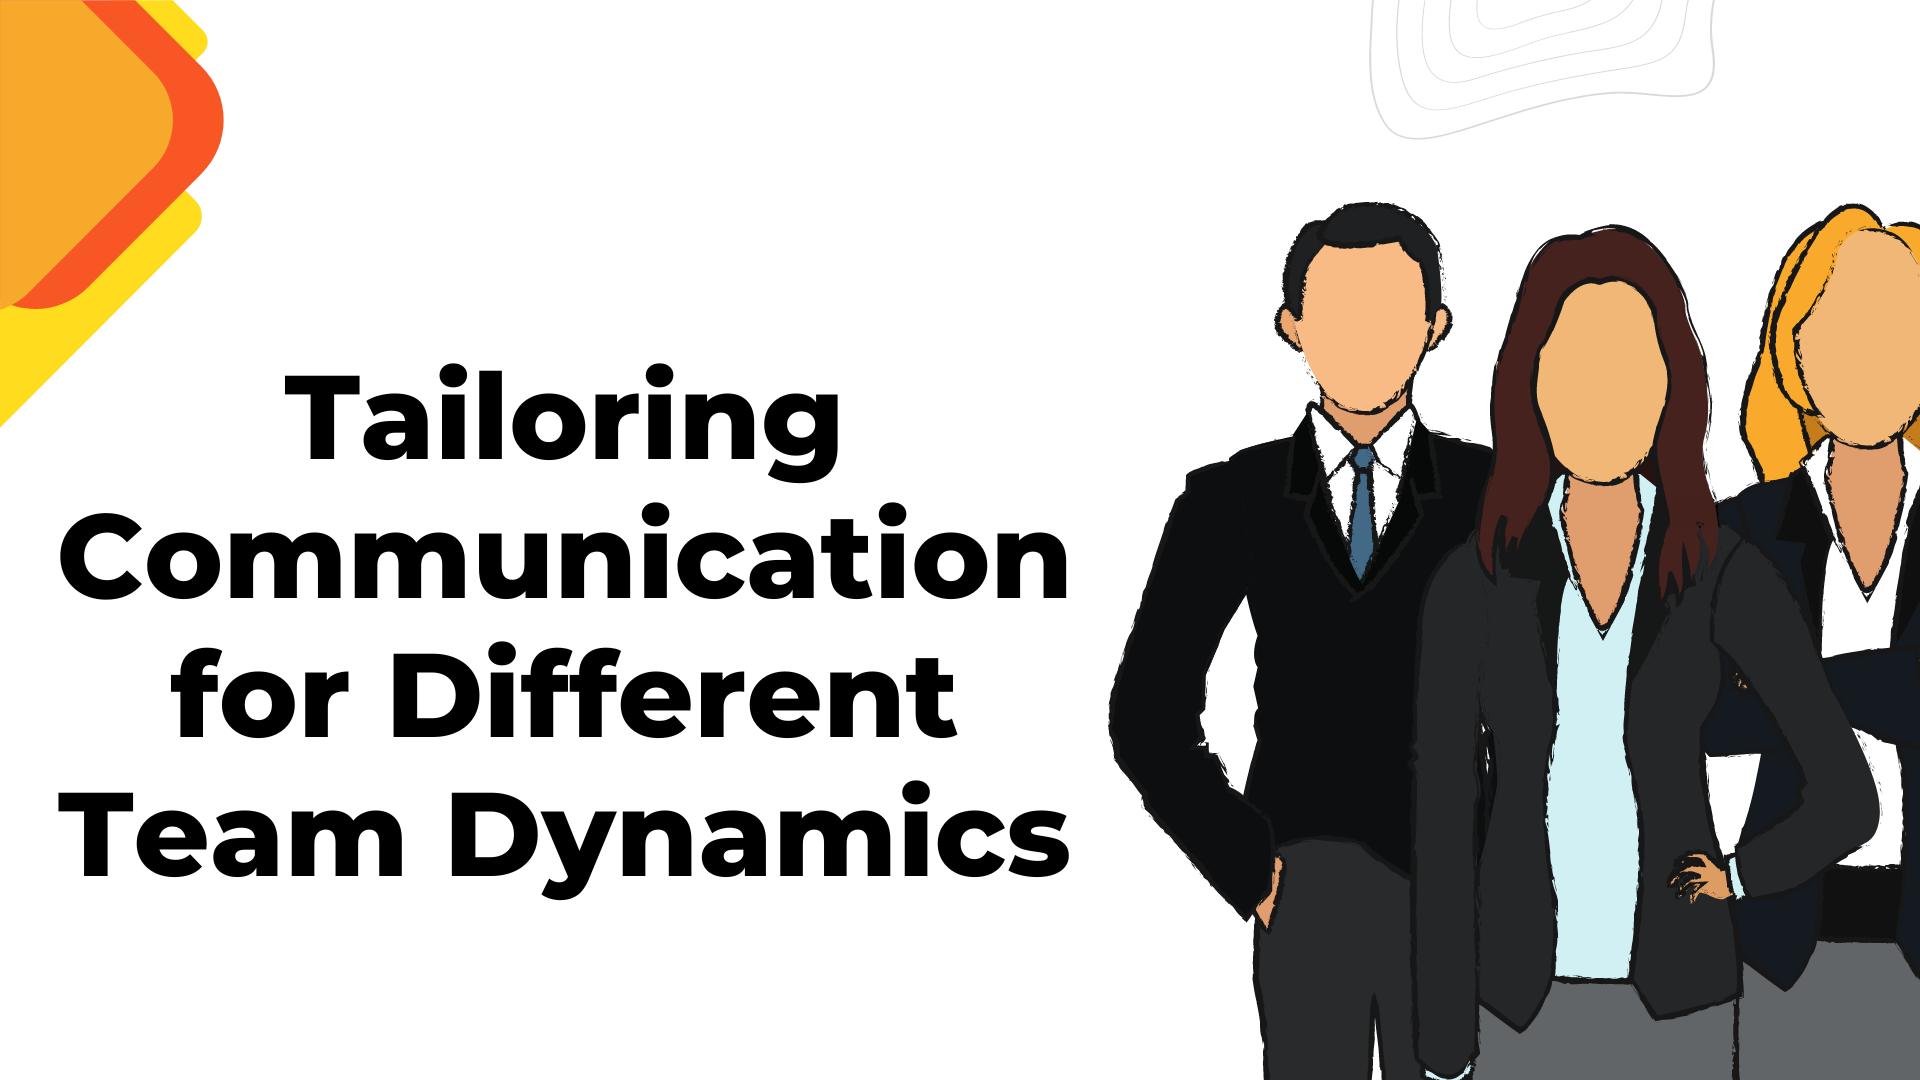 Tailoring Communication for Different Team Dynamics